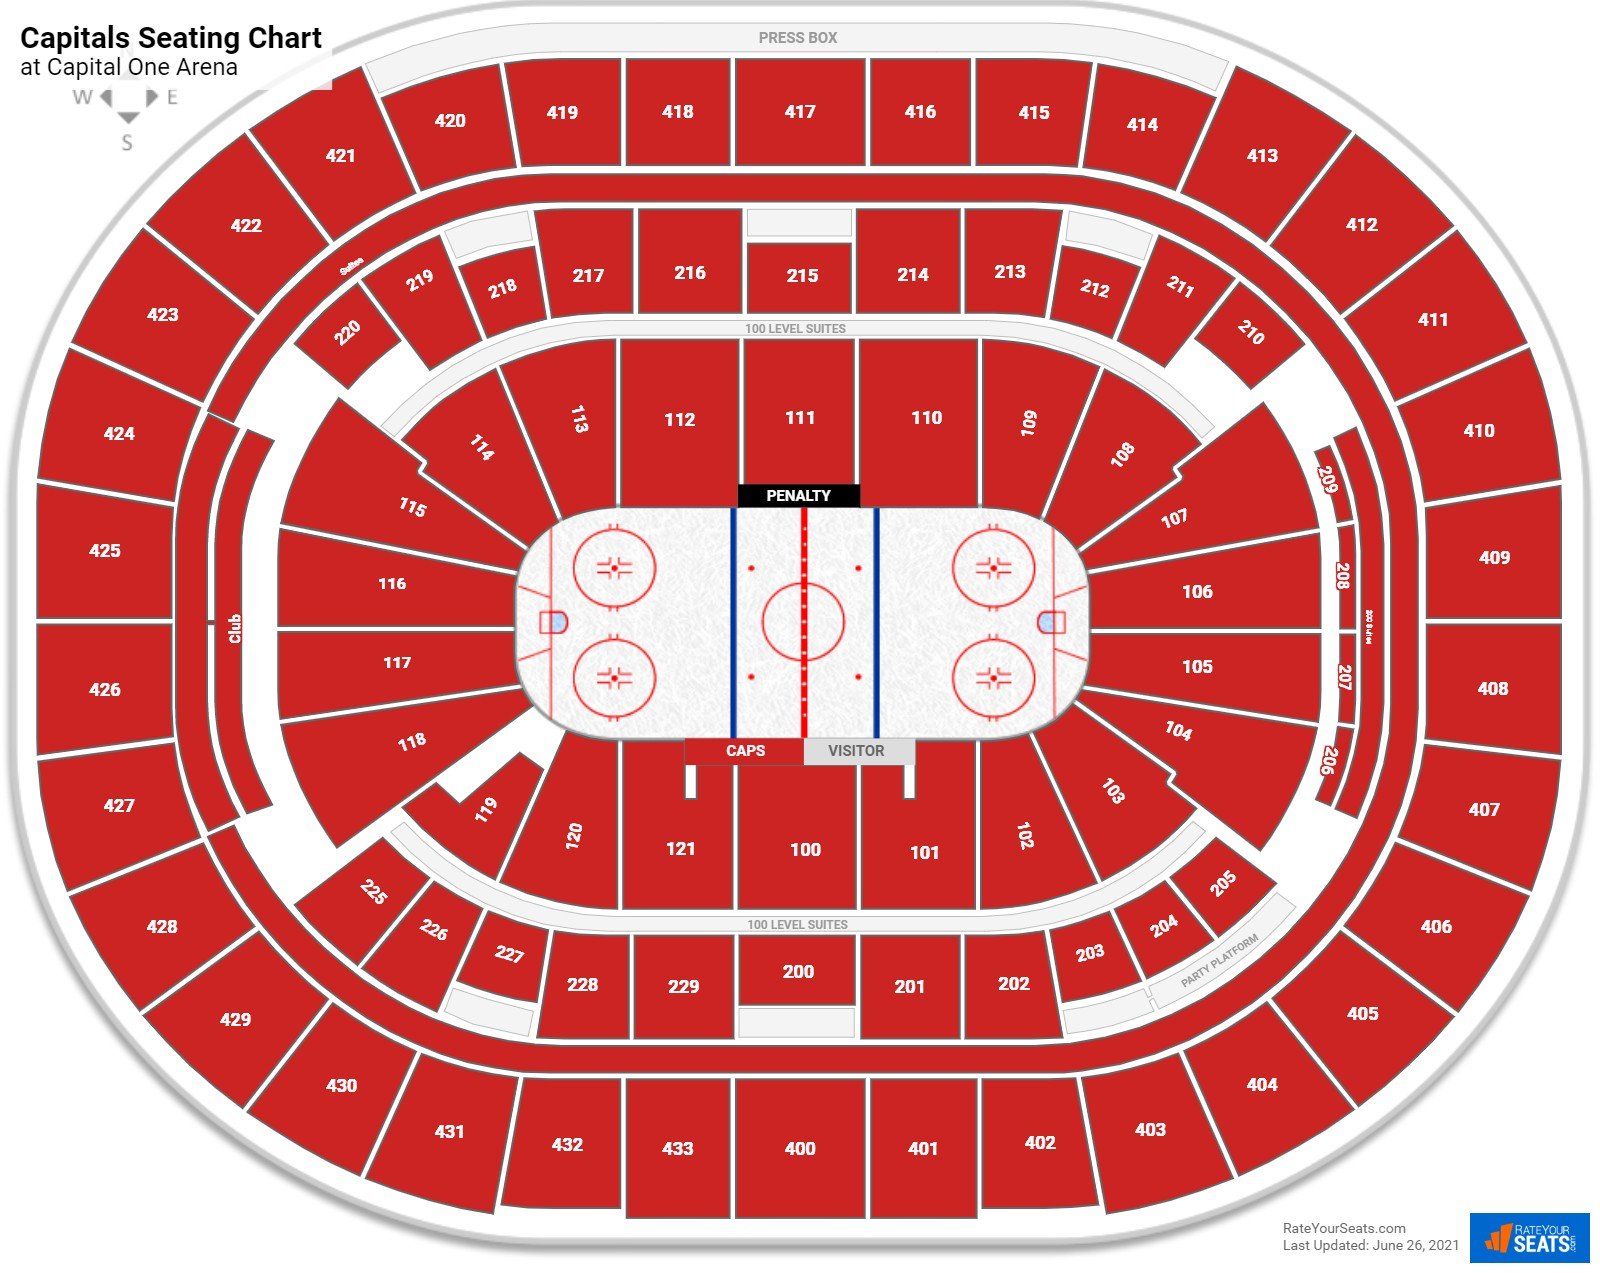 Capital One Arena Concert Seating Chart 